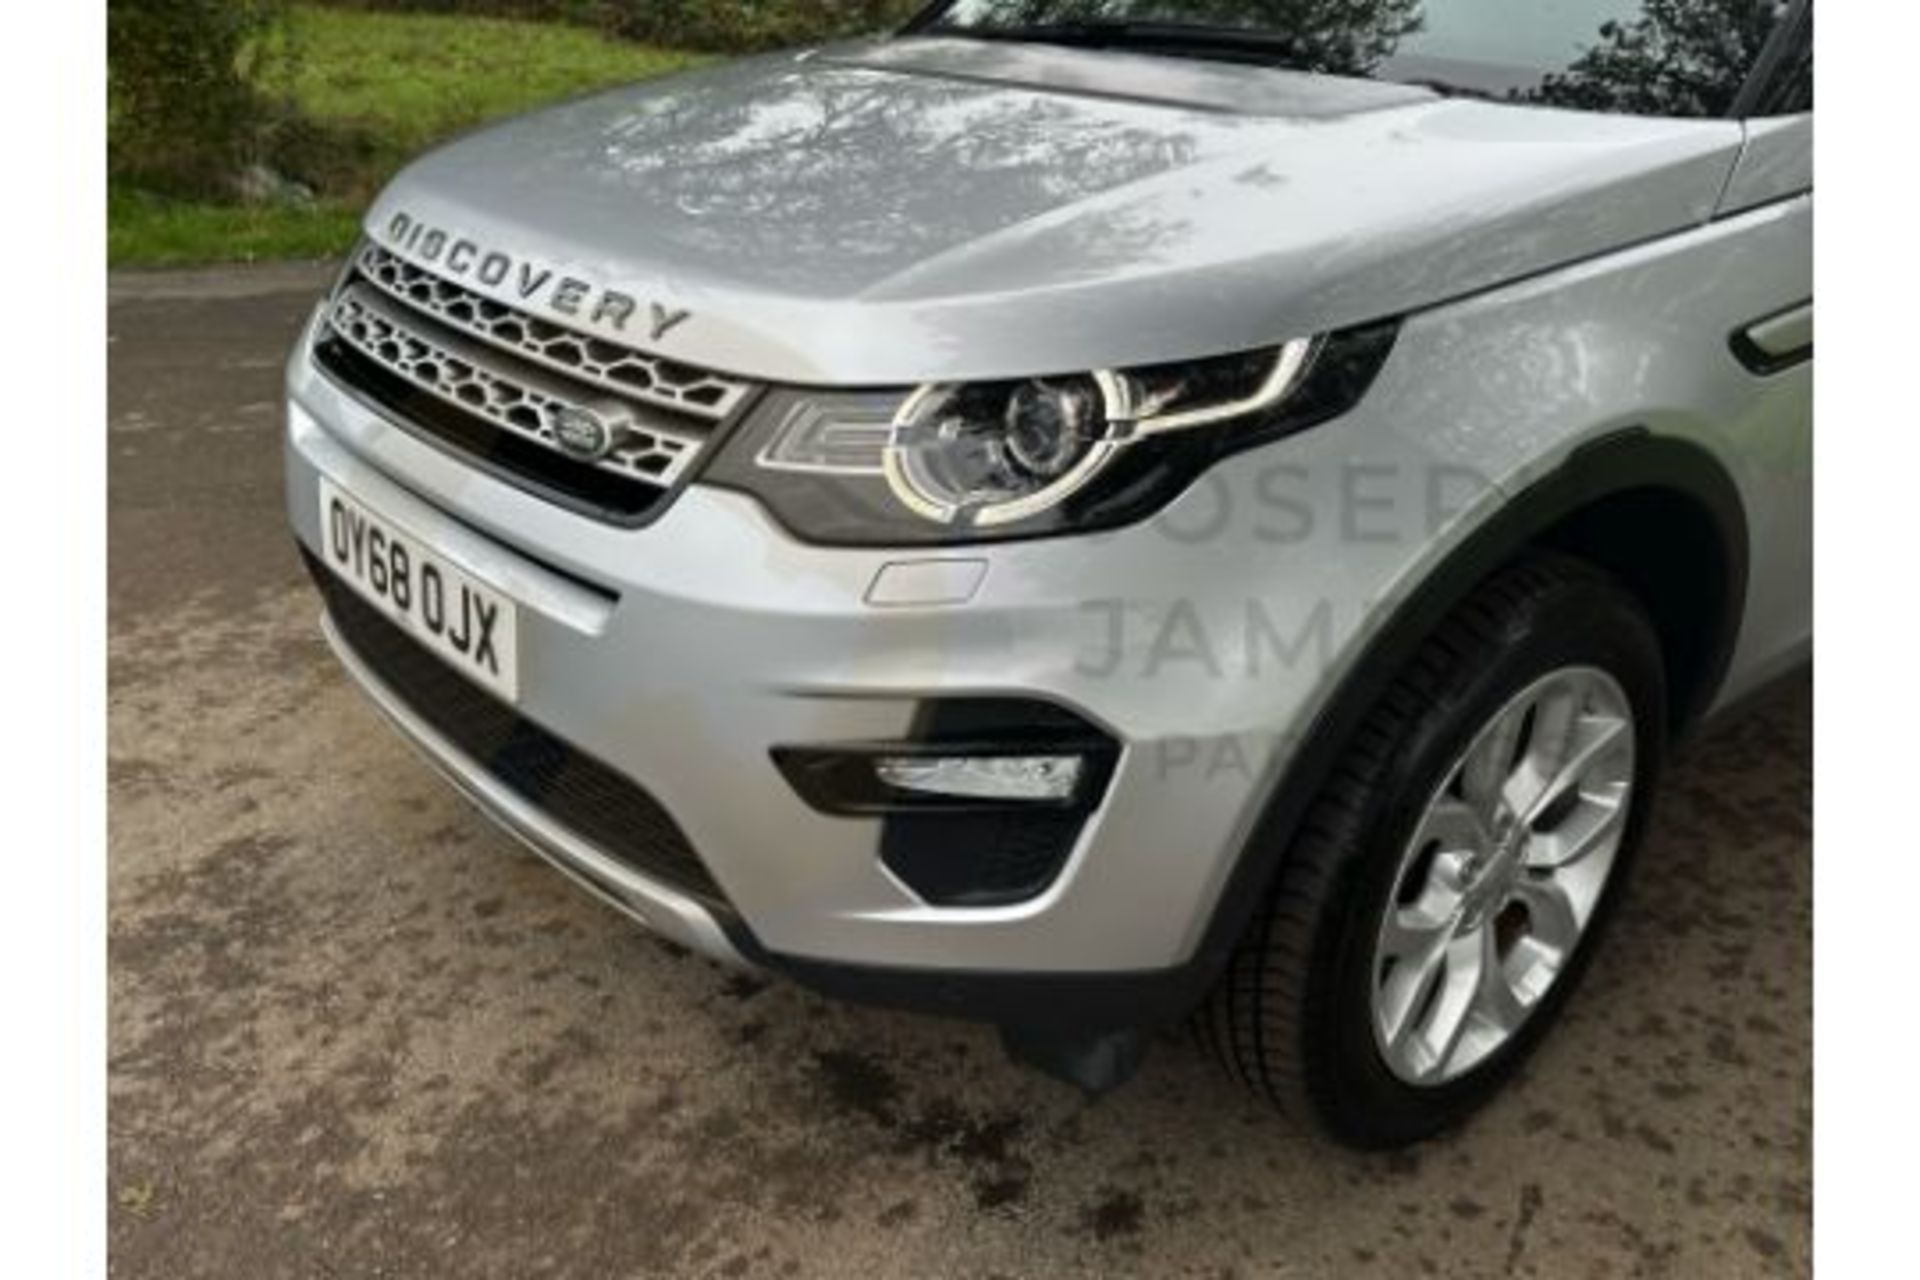 (ON SALE) LANDROVER DISCOVERY SPORT "HSE" EDITION 2.0 TD4 (180) AUTOMATIC - 68 REG - PAN ROOF - Image 15 of 51